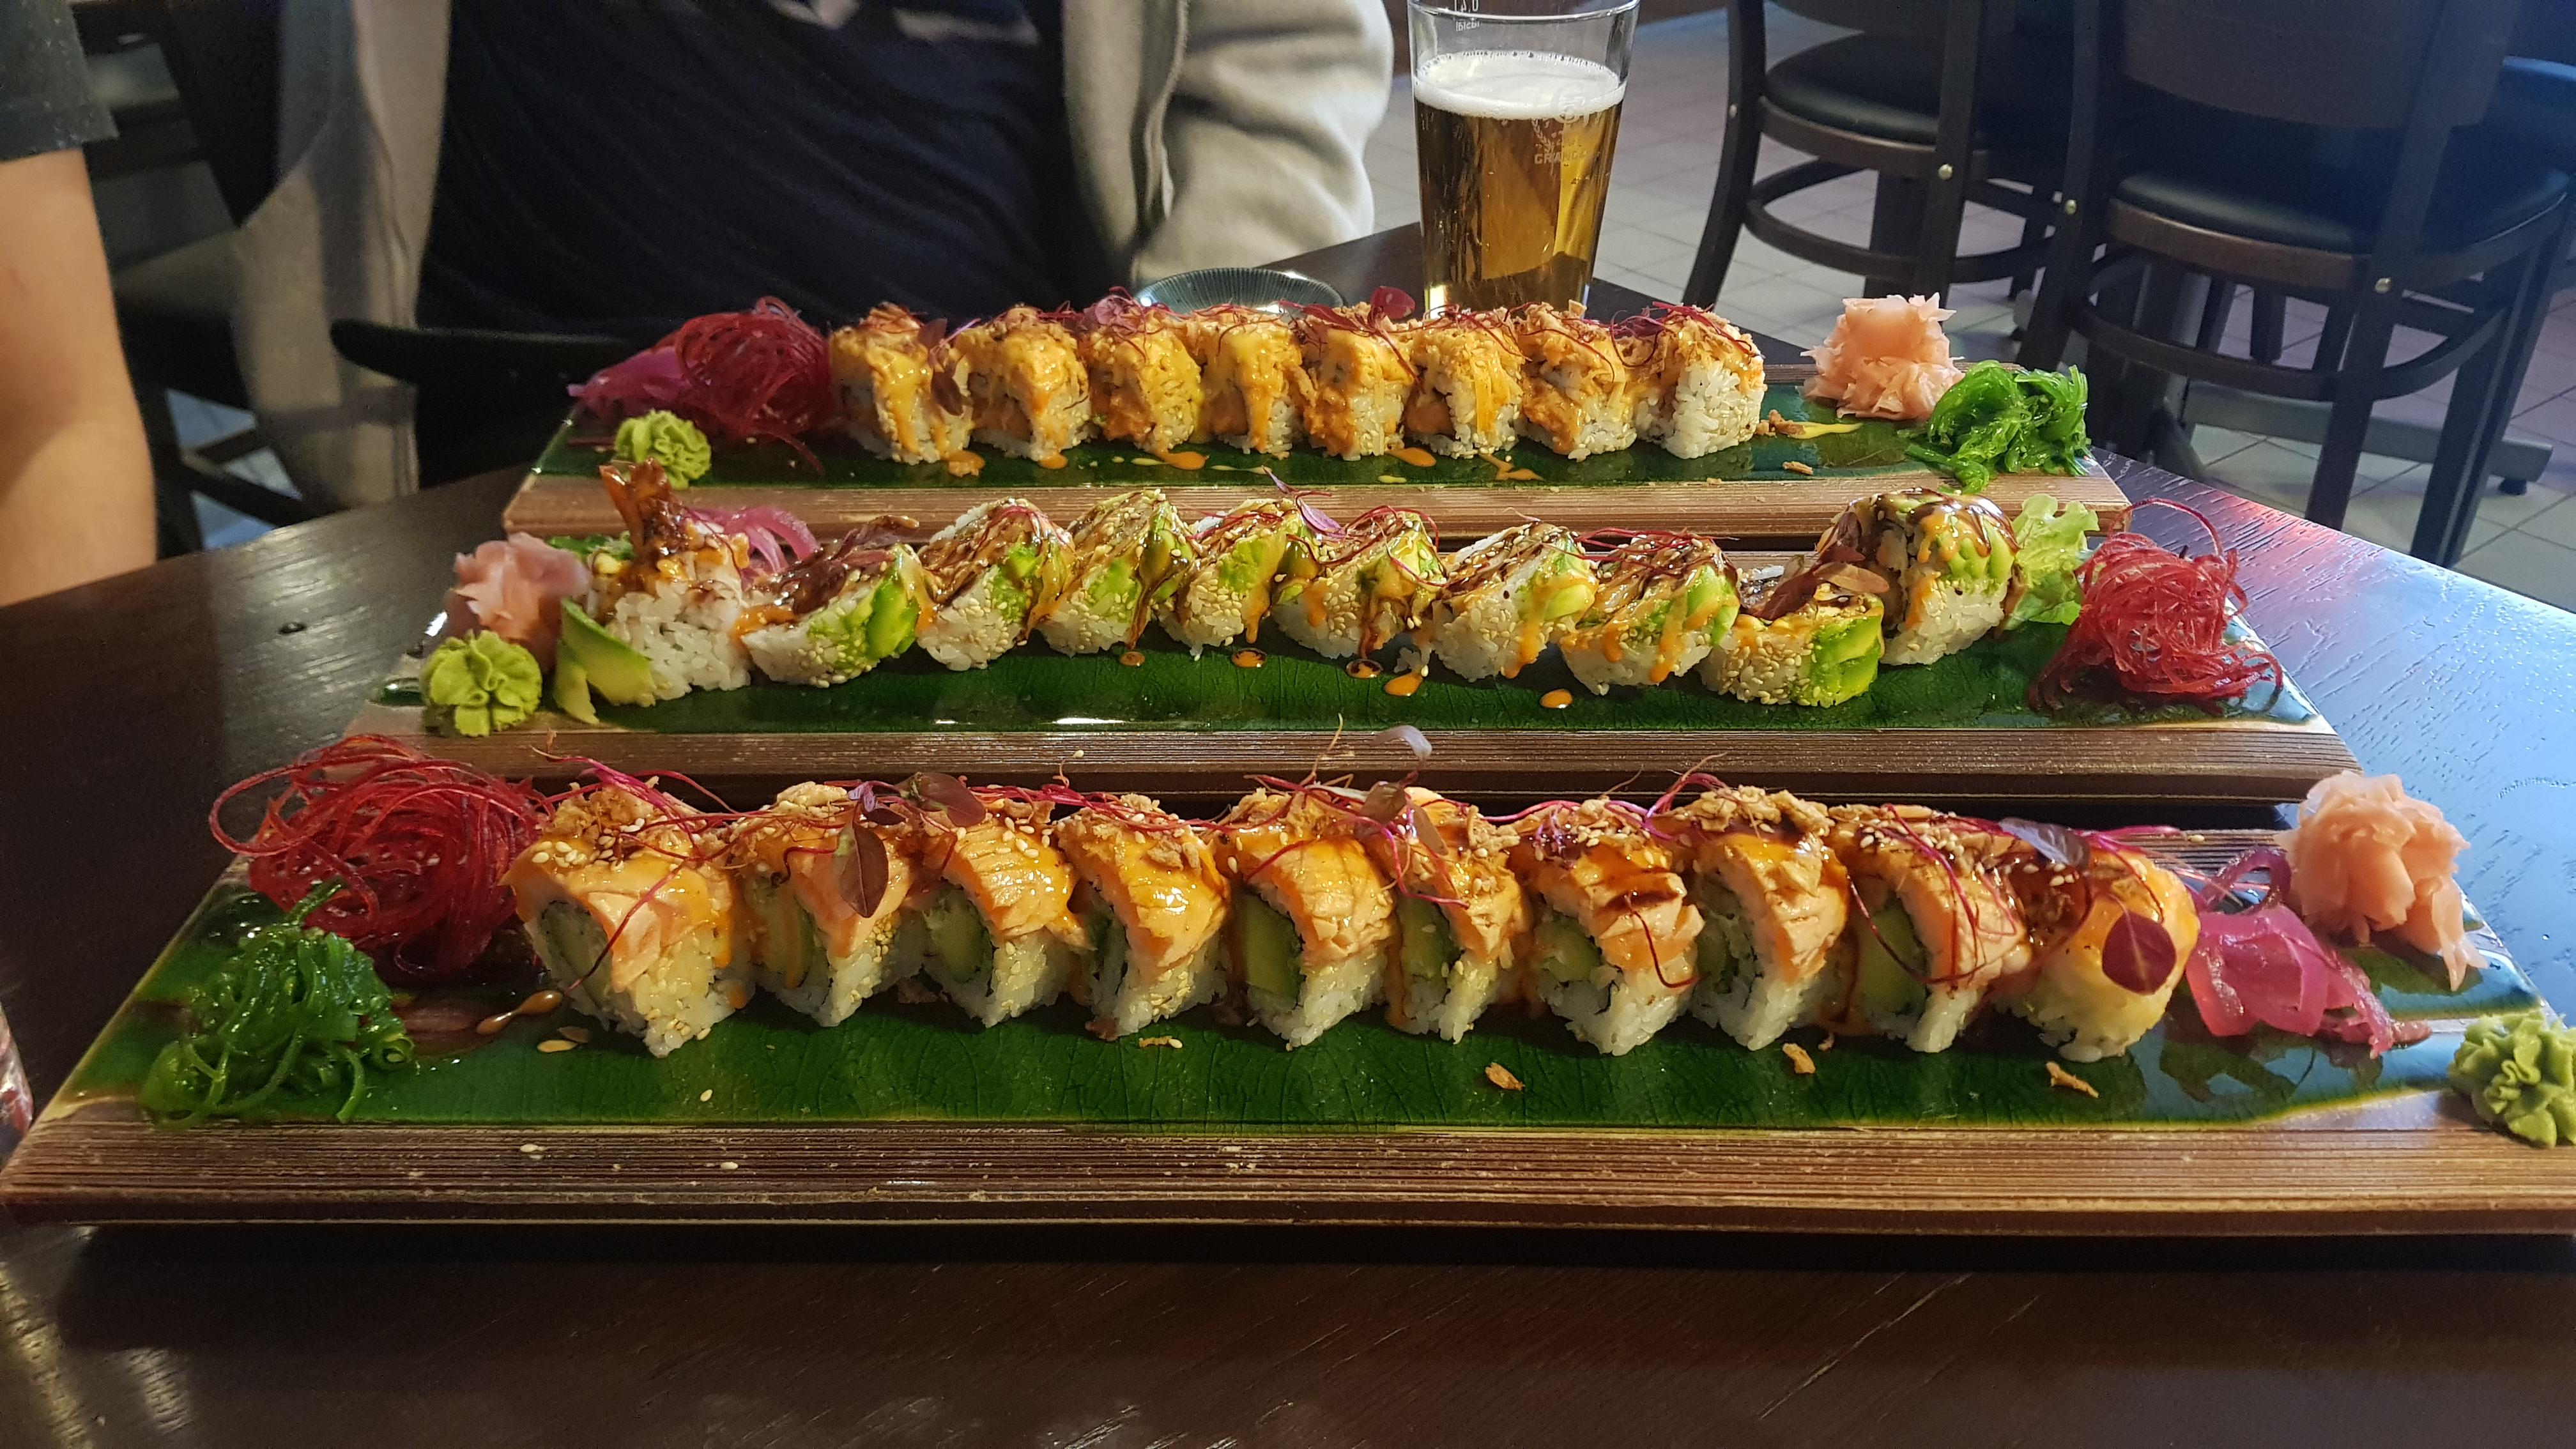 A new sushi place opened close to me. I found my new home. - Dining and